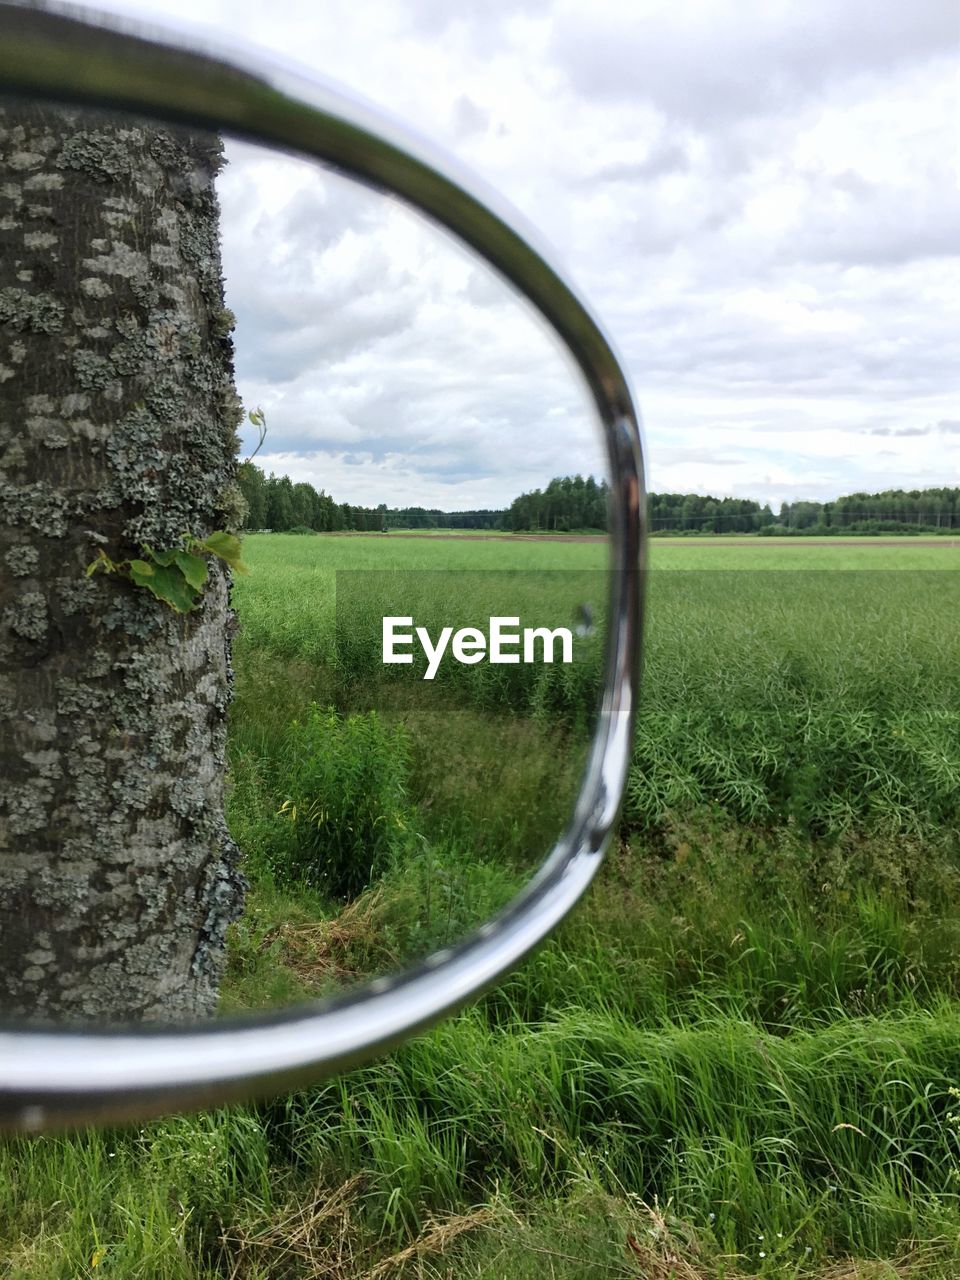 Reflection of crops on side-view mirror